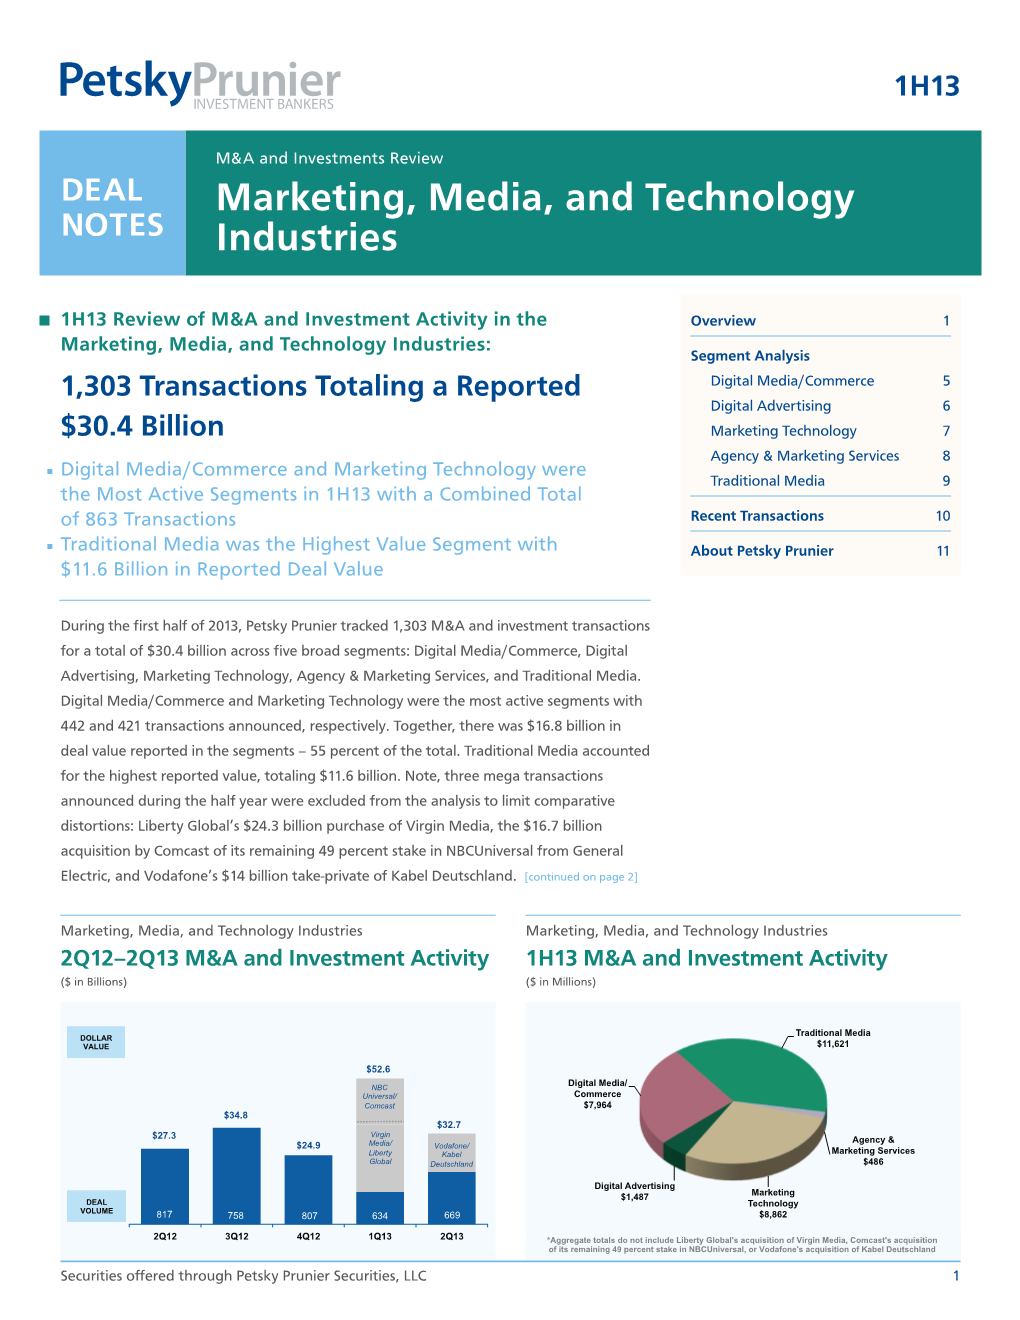 Marketing, Media, and Technology Industries